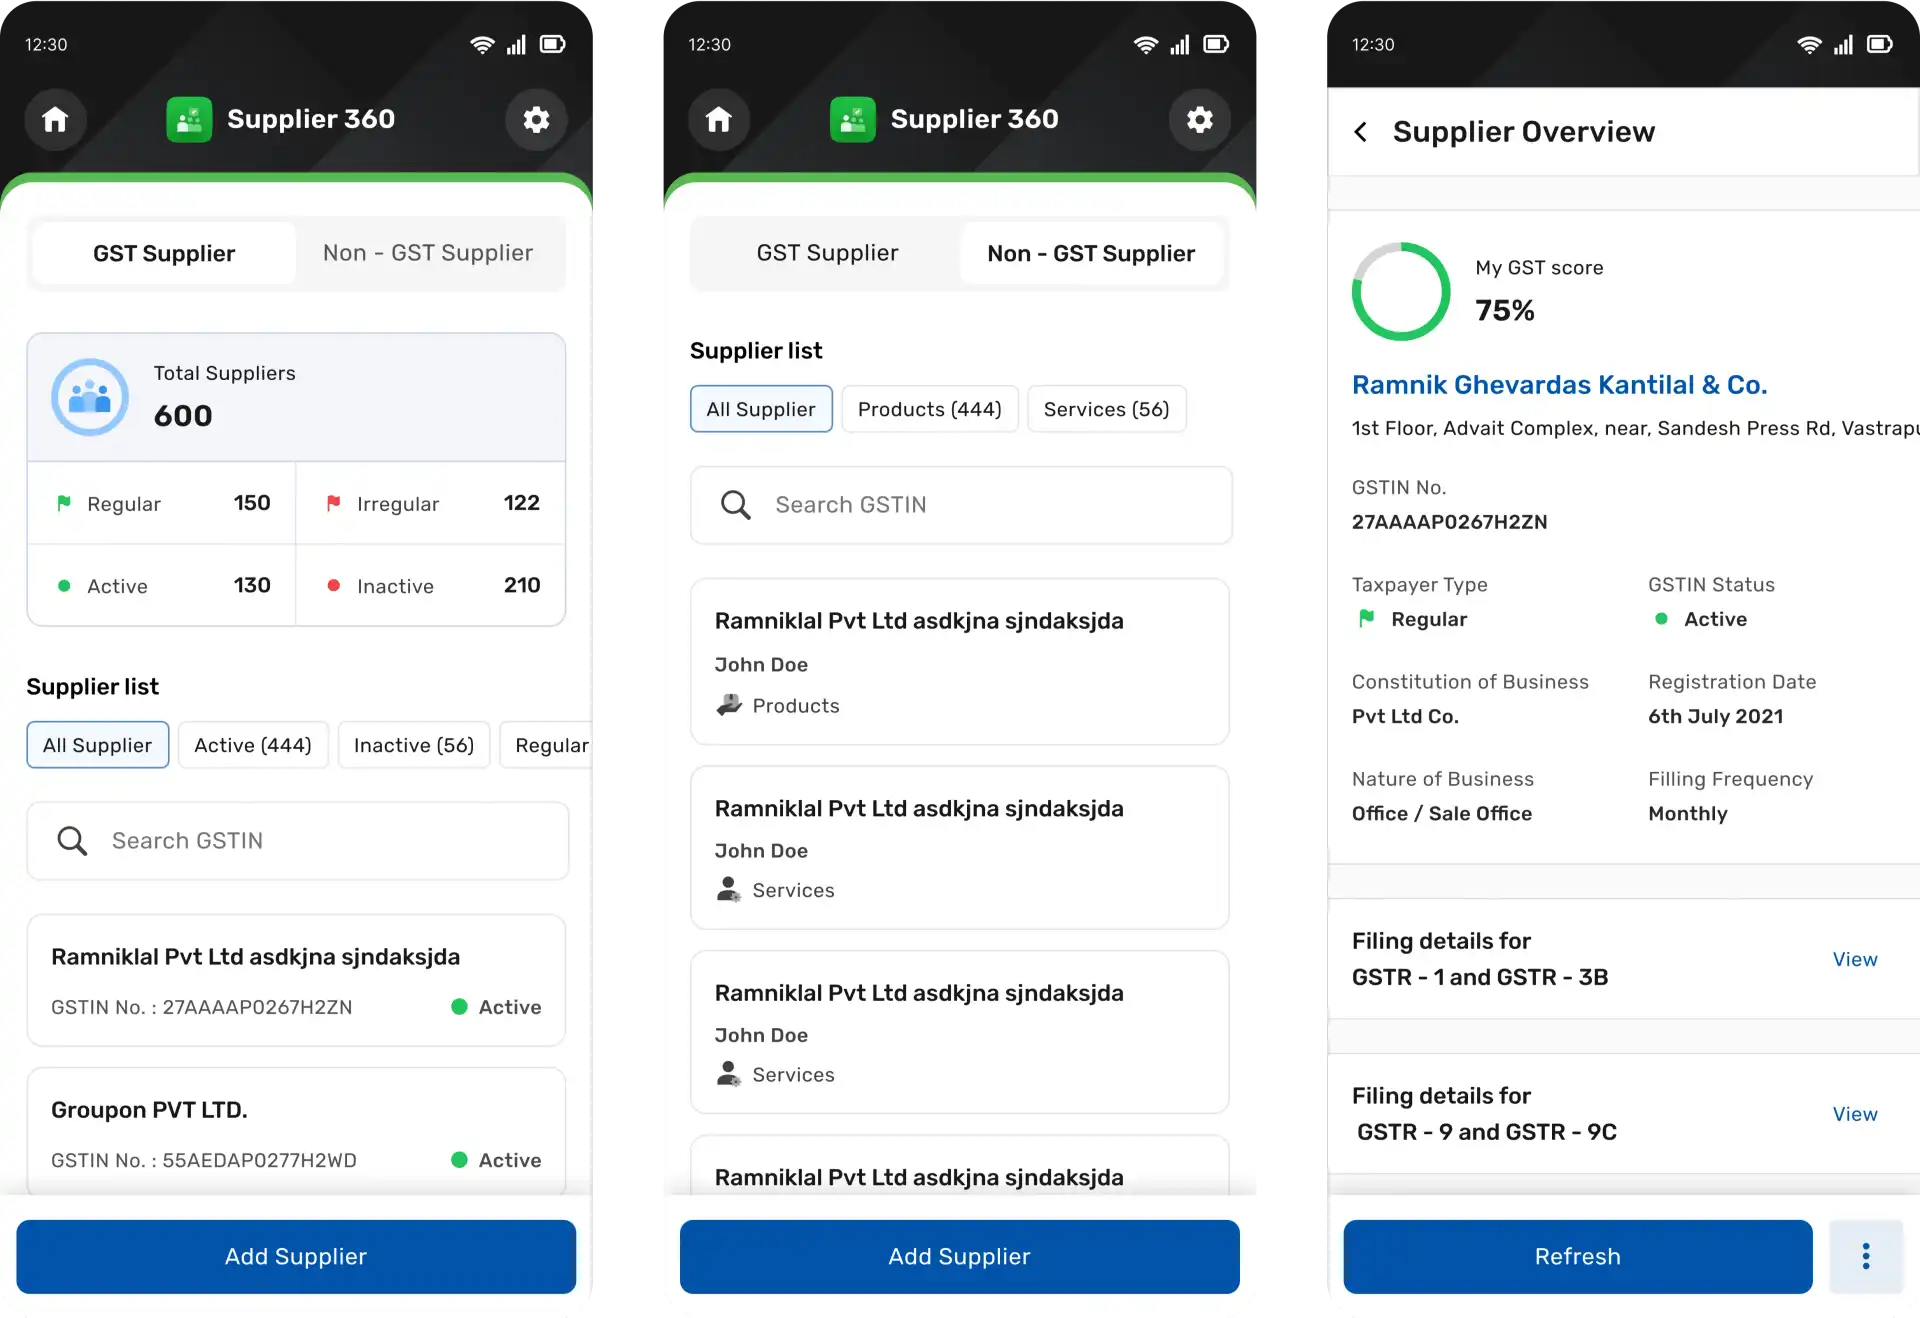 Mobile Responsive to check supplier overview and compliance status